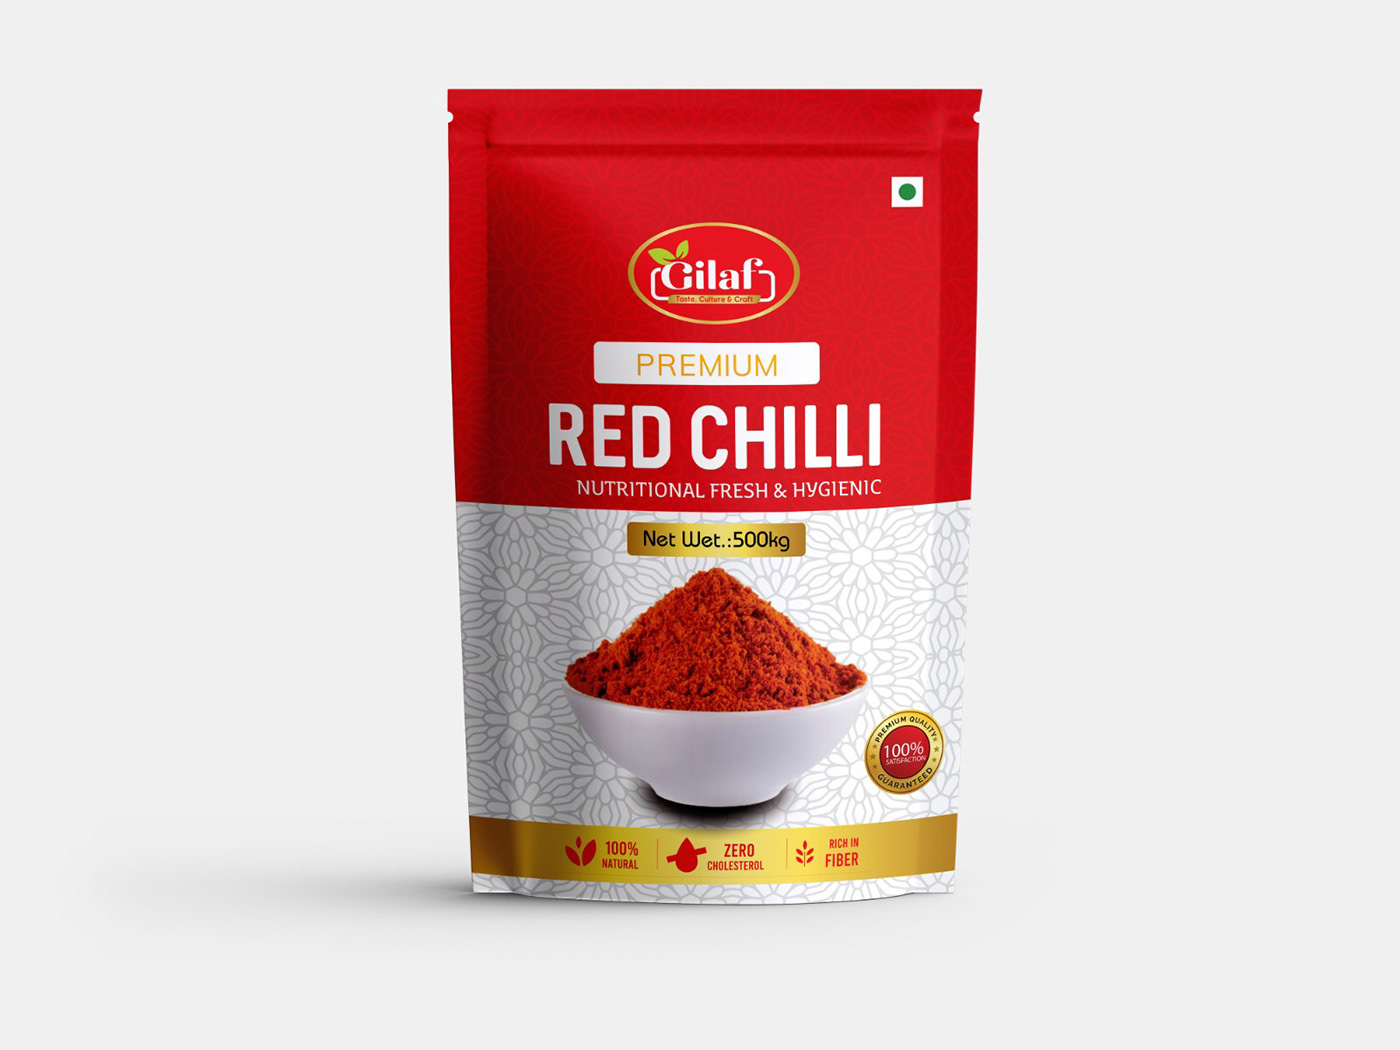 Red Chilli Pouch Design  Pouch Packaging branding  mockups Packaging product design  brand identity Chili Powder Pouch Design red chilli powder